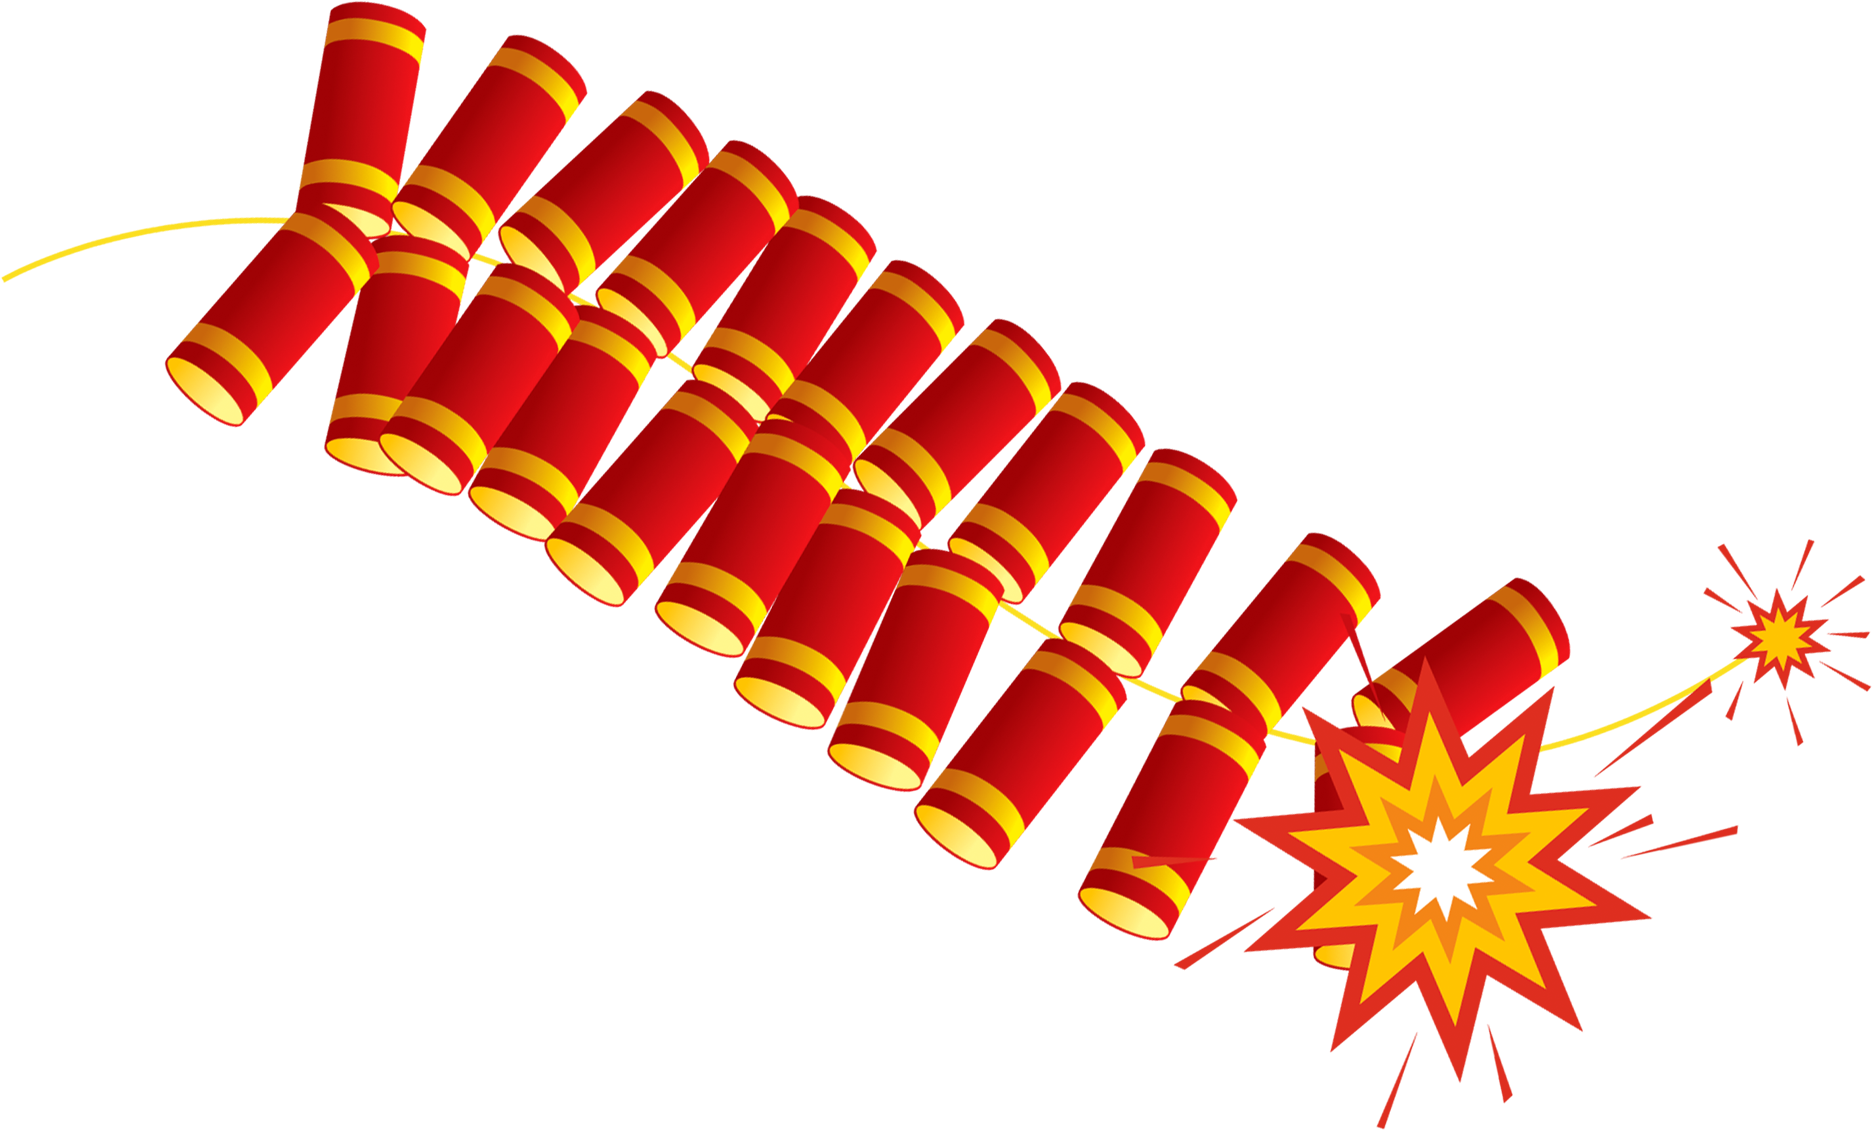 Exploding Firecracker Graphic PNG image